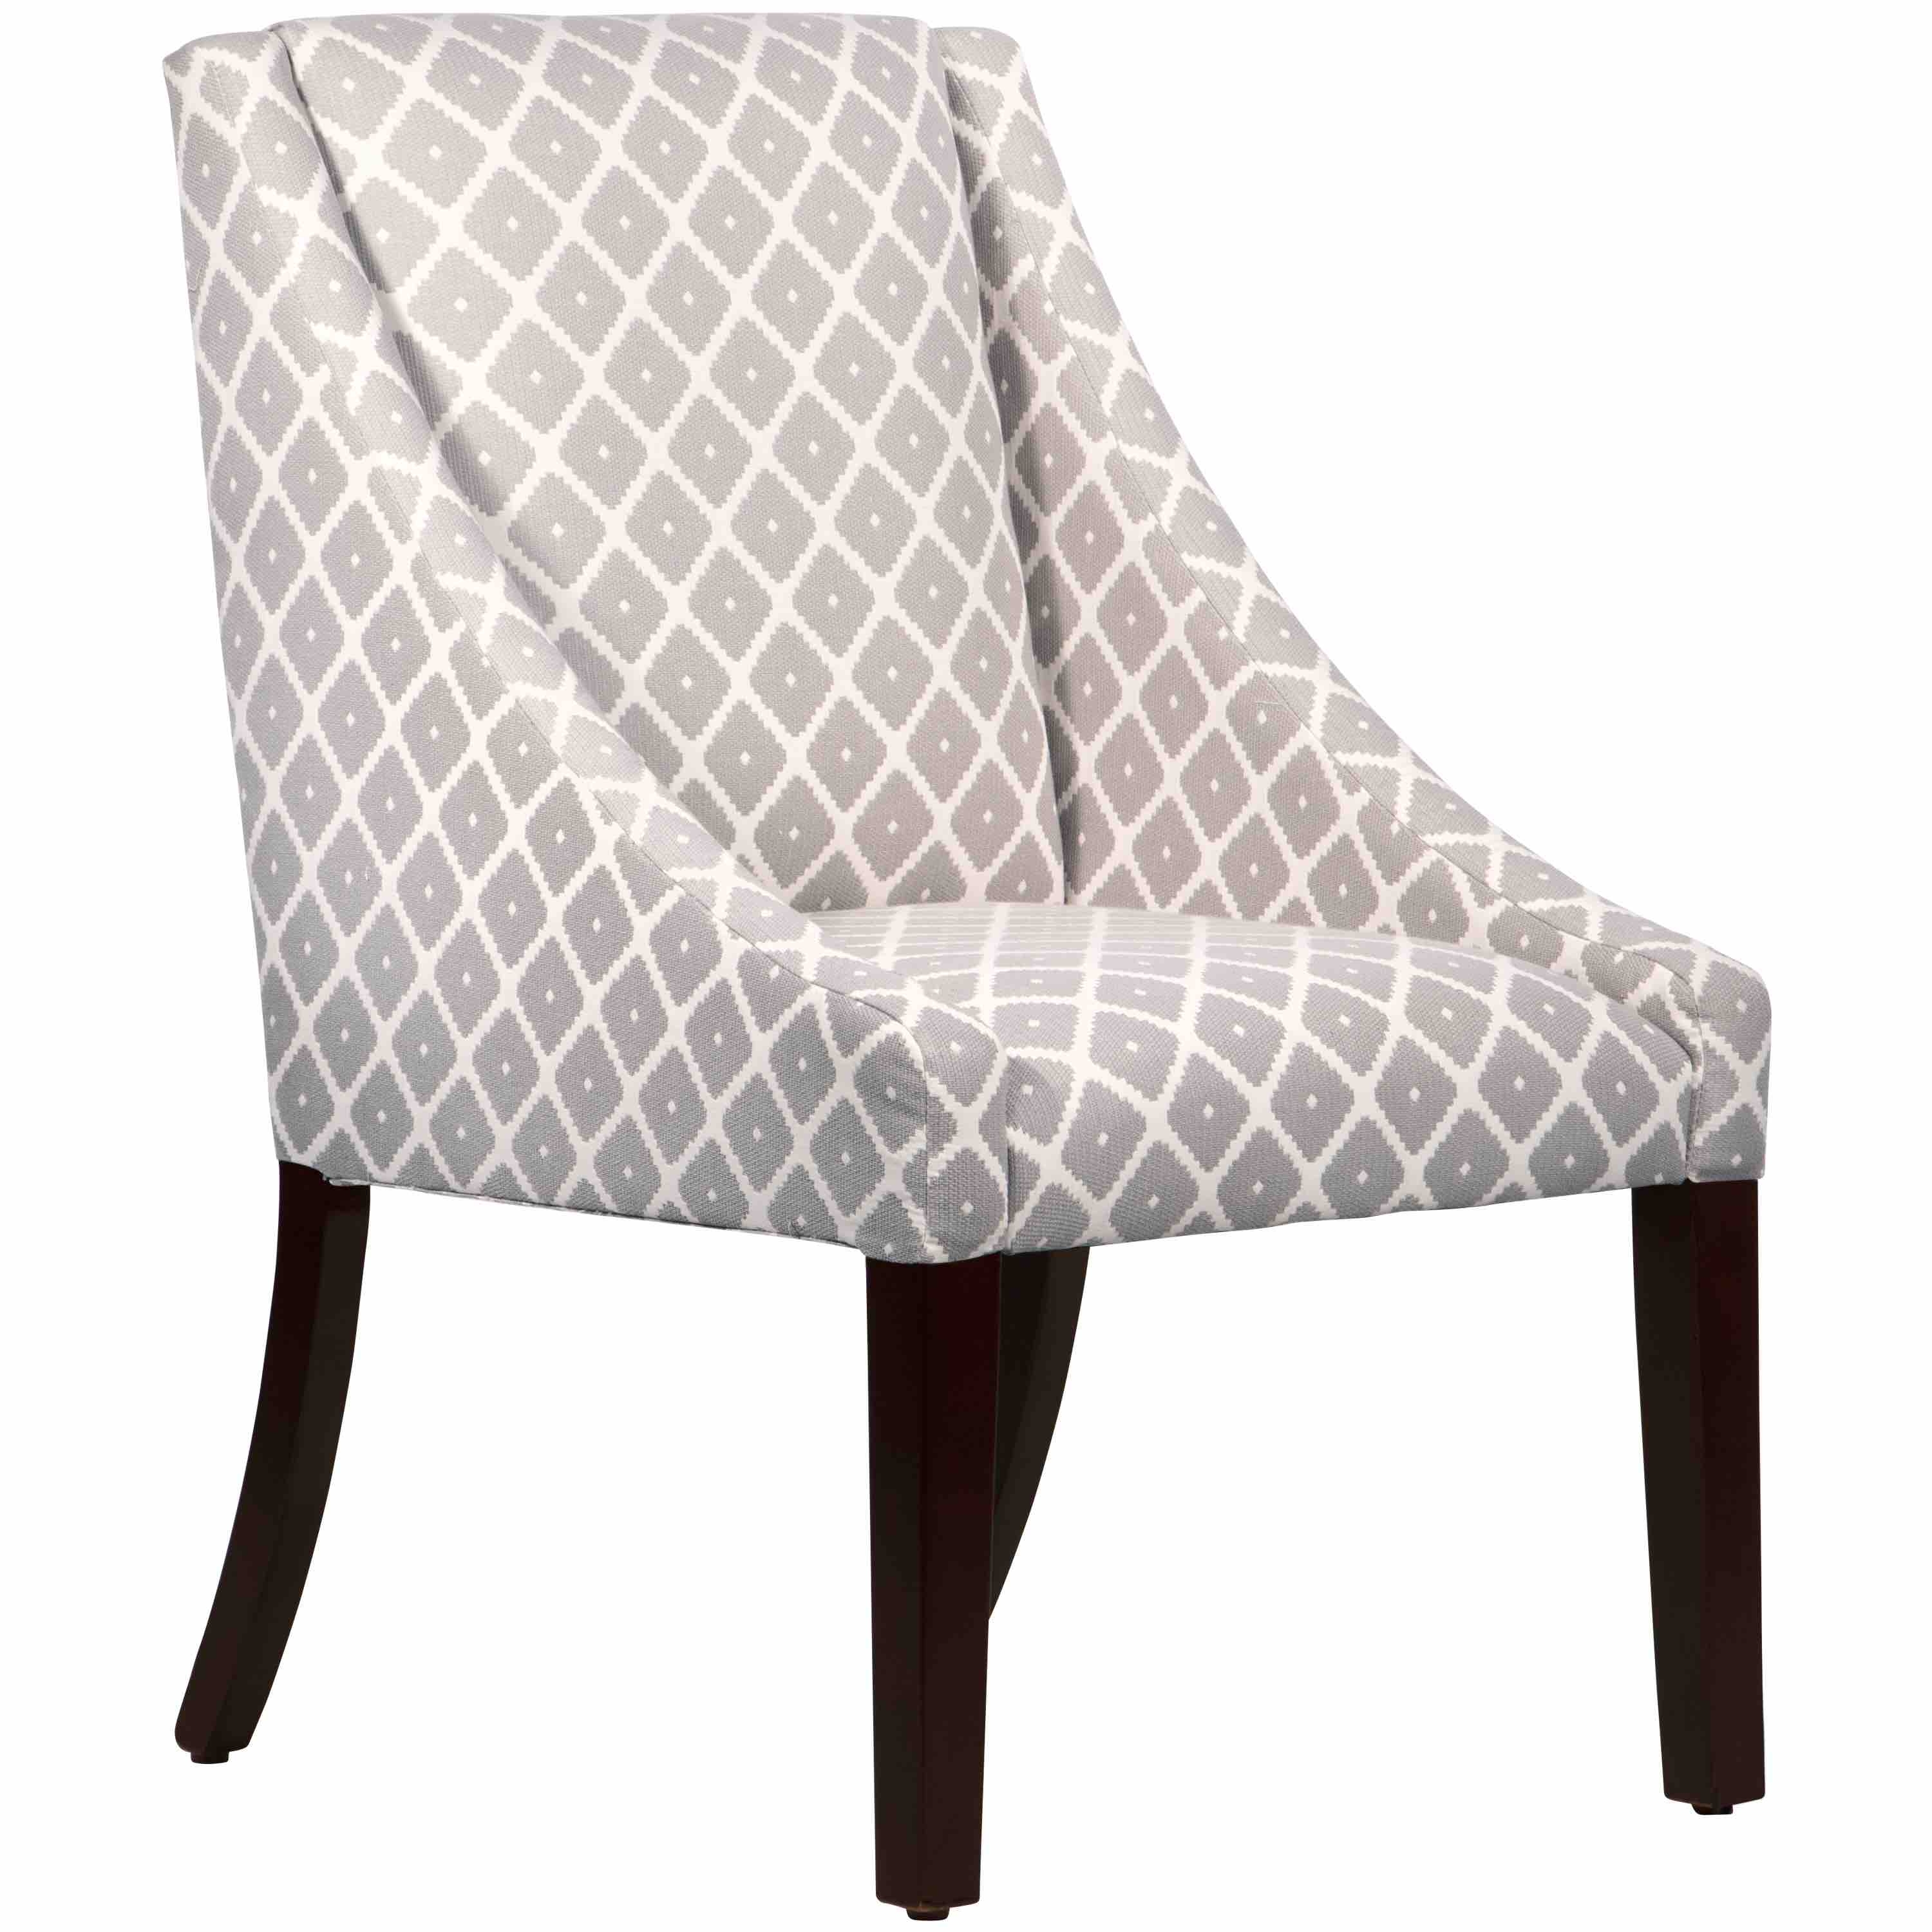 Swoop Dining Chair in Souk Dove - Image 0